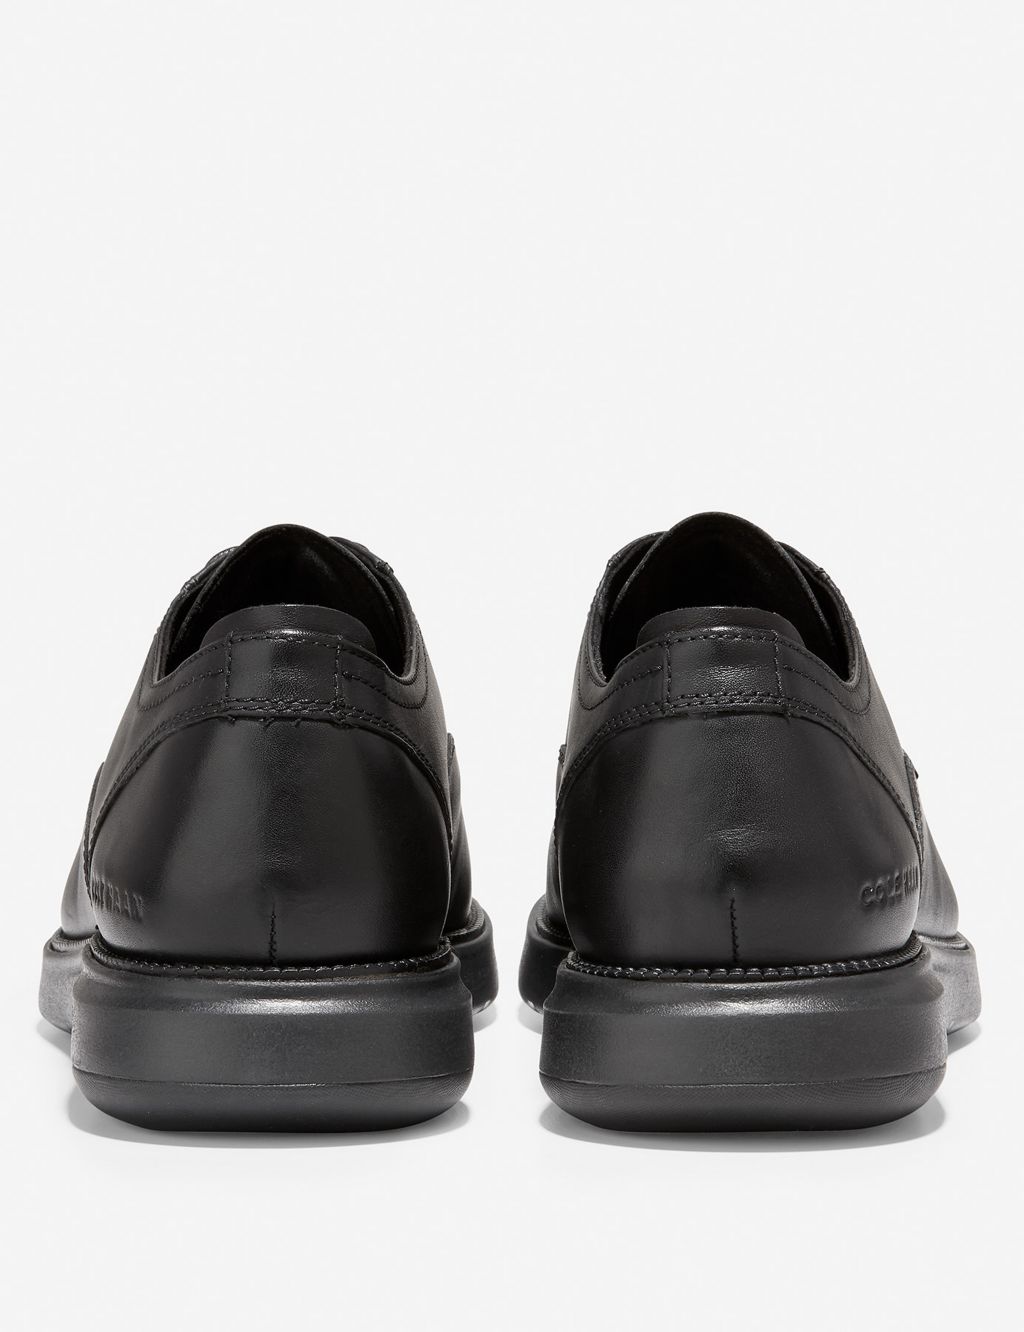 Grand Atlantic Wide Fit Leather Oxford Shoes image 4